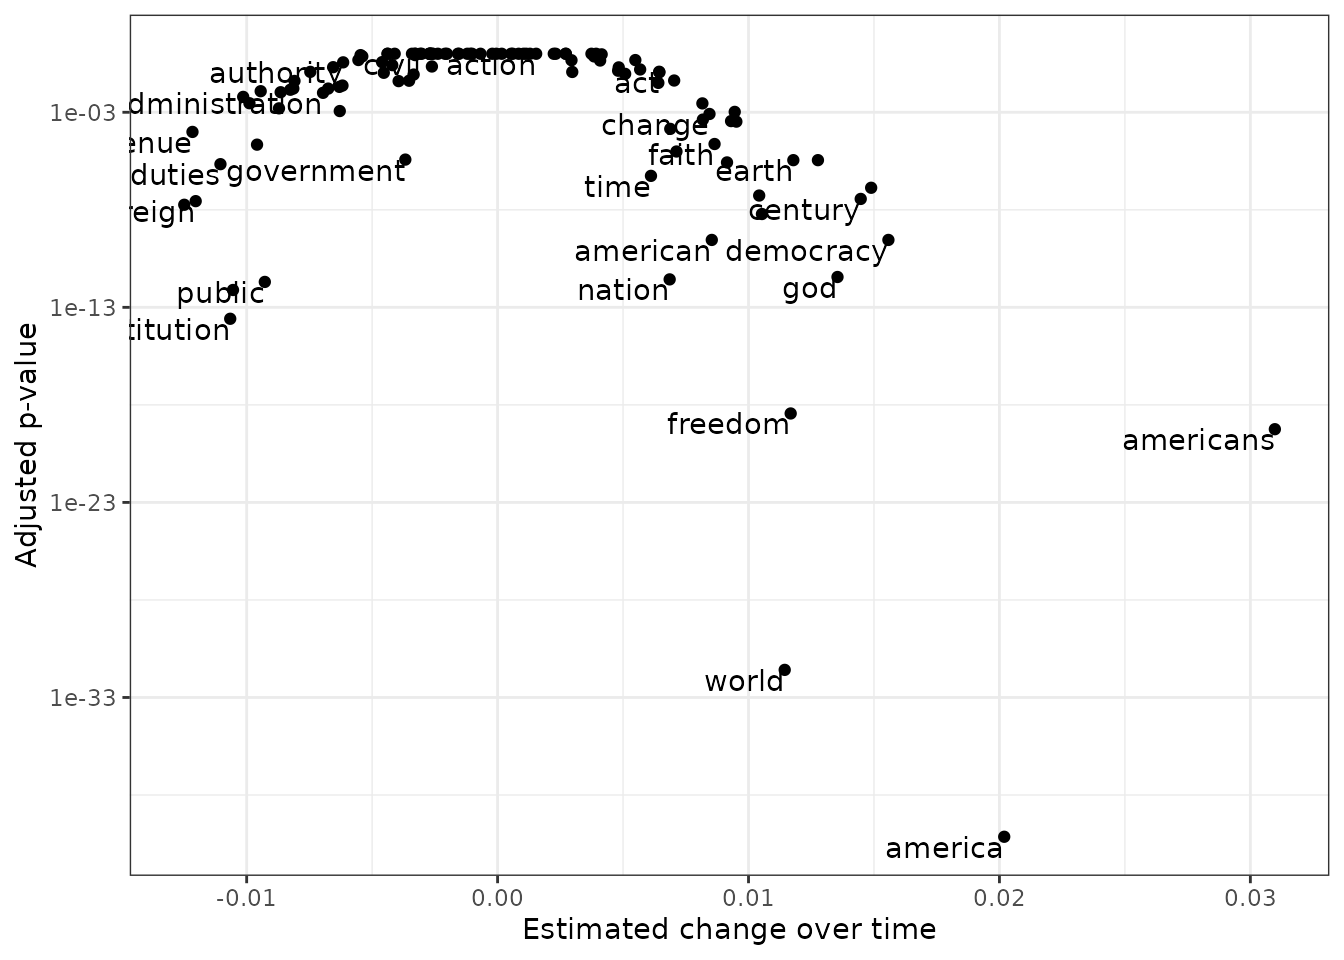 Volcano plot showing that words like "america" and "world" have increased over time with small p-values, while words like "public" and "institution" have decreased